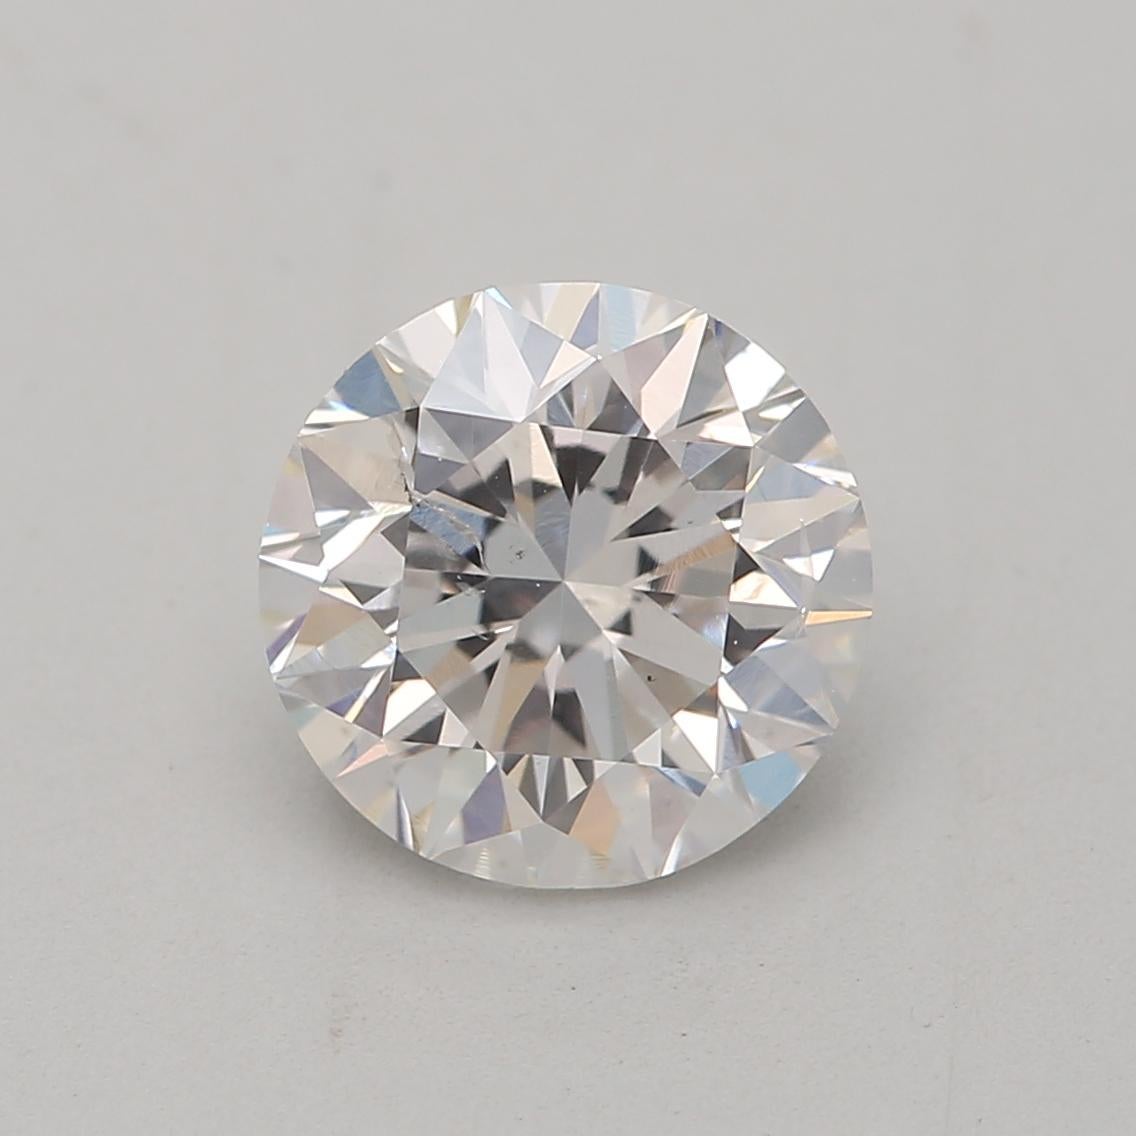 *100% NATURAL FANCY COLOUR DIAMOND*

✪ Diamond Details ✪

➛ Shape: Round
➛ Colour Grade: Faint Pinkish Brown
➛ Carat: 1.00
➛ Clarity: SI2
➛ GIA Certified 

^FEATURES OF THE DIAMOND^

This 1.00 carat diamond refers to the diamond's weight, not its